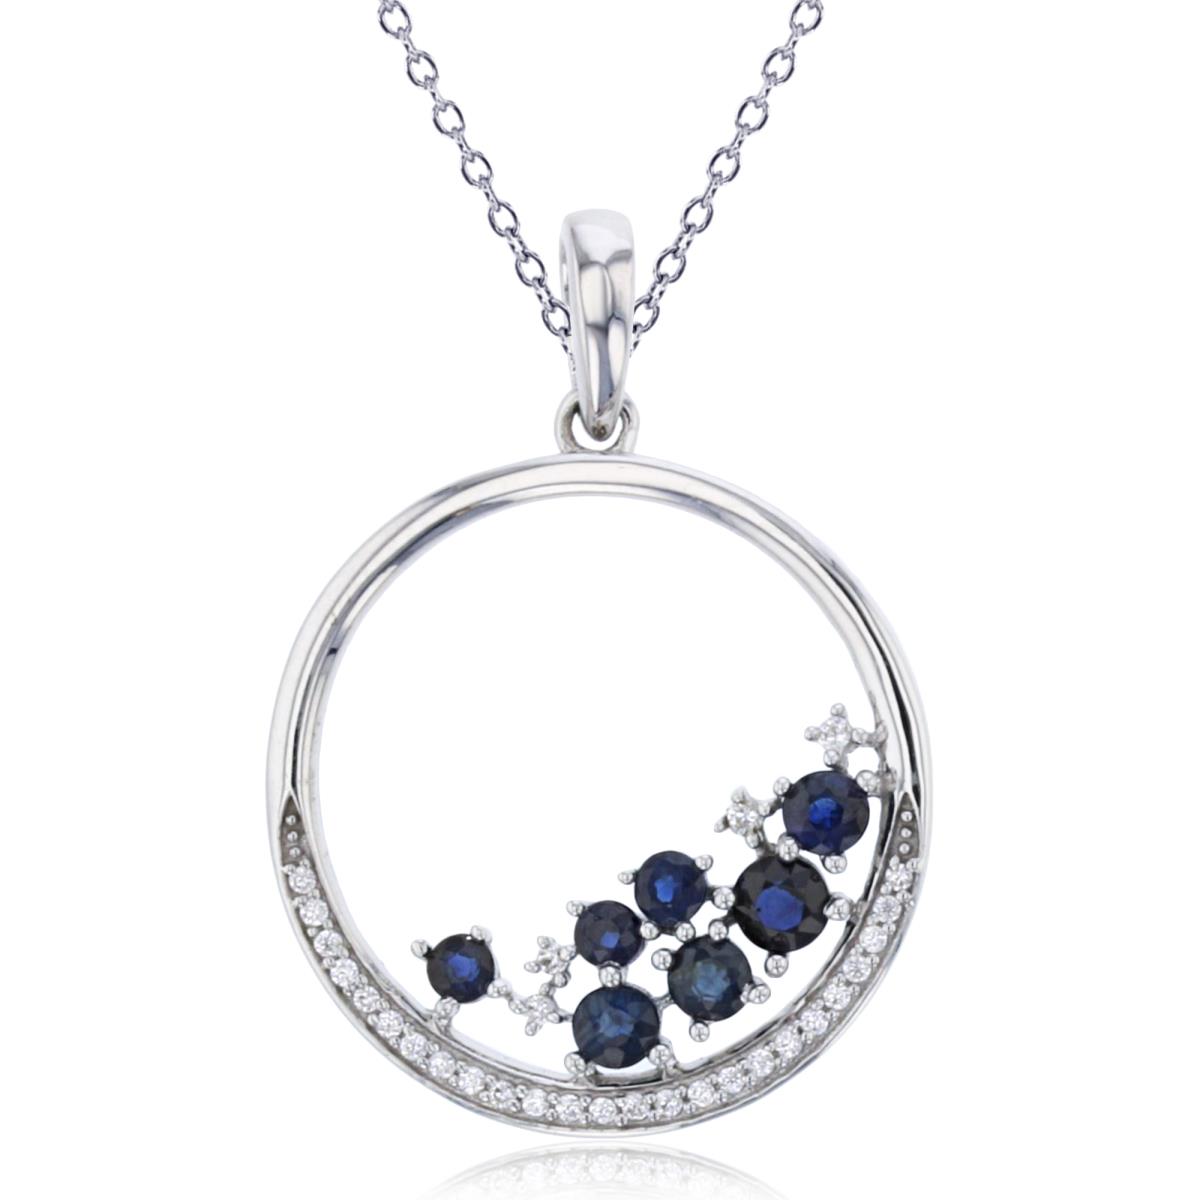 Sterling Silver Rhodium 0.10CTTW Rnd Diamonds & Rnd Sapphire Scattered Open Circle 18"Necklace